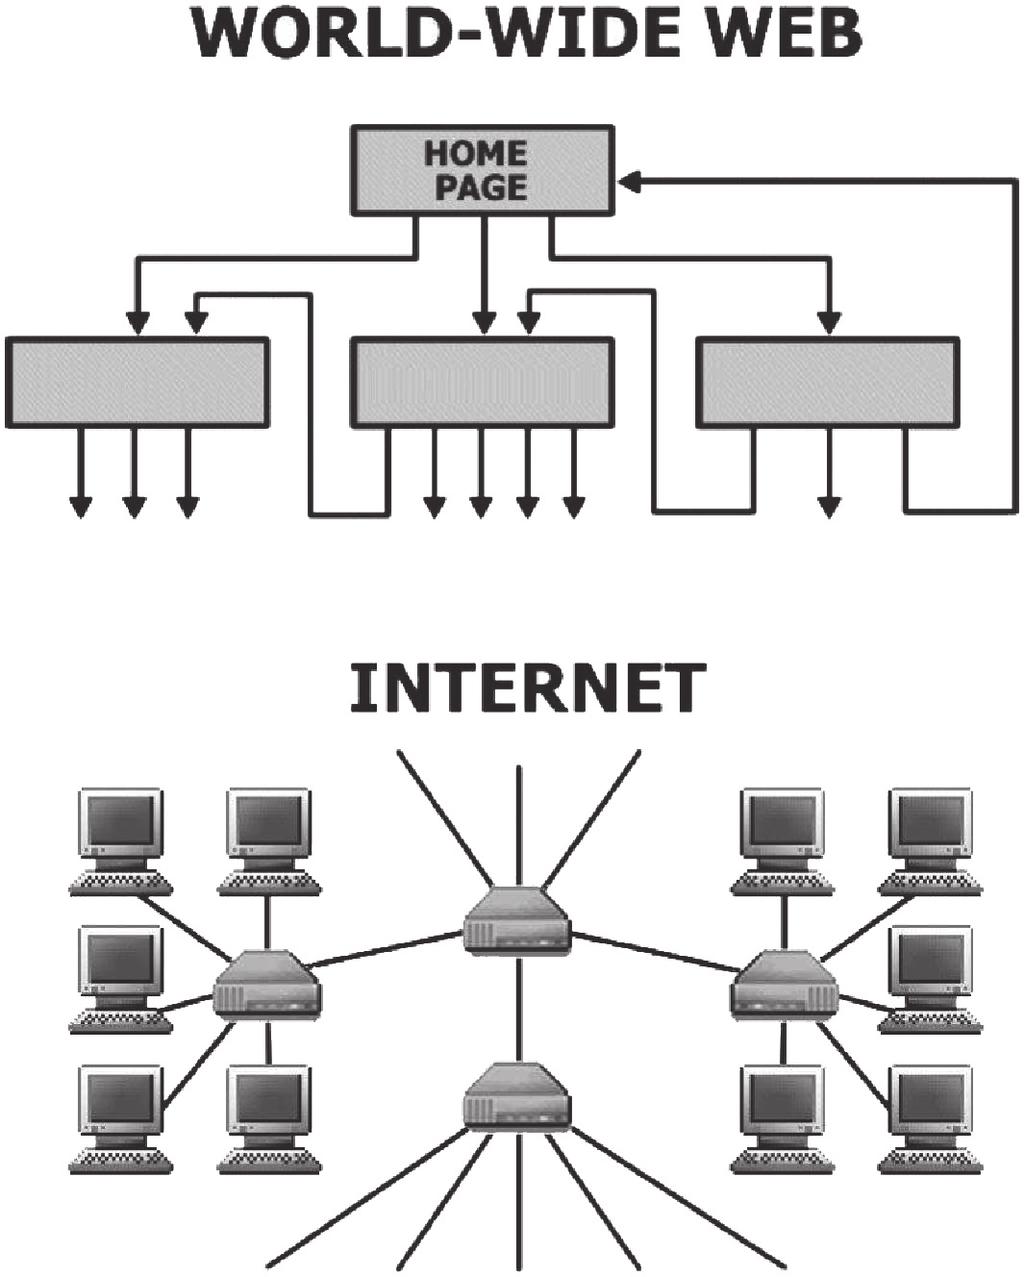 2 1 Graph Theory and Small-World Networks 1 2 3 4 A B C D E F G H I J K A B F H C I E D G K J Fig. 1.1 Left: illustration of the network structure of the world-wide web and of the Internet (from??).